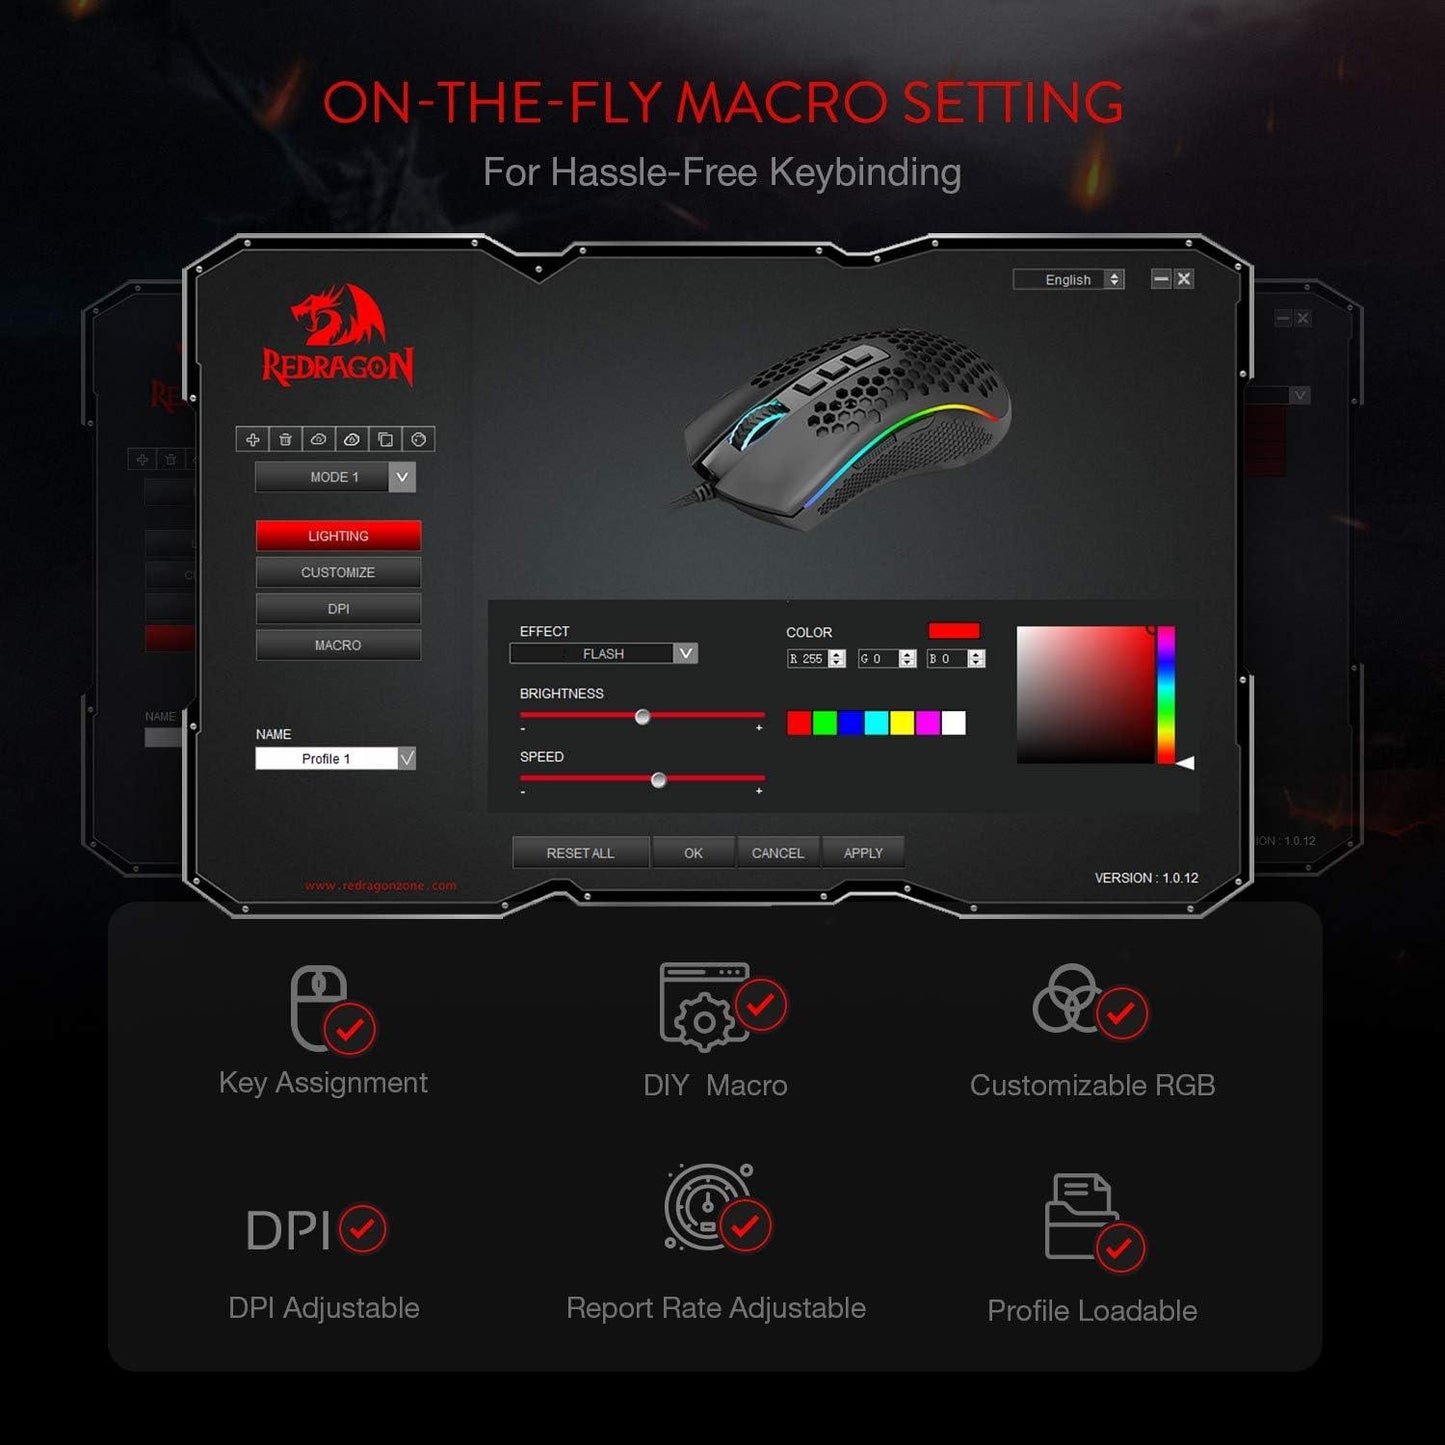 Redragon M808 Storm Ultralight Honeycomb RGB Gaming Mouse - product details on the fly macro settings - b.savvi